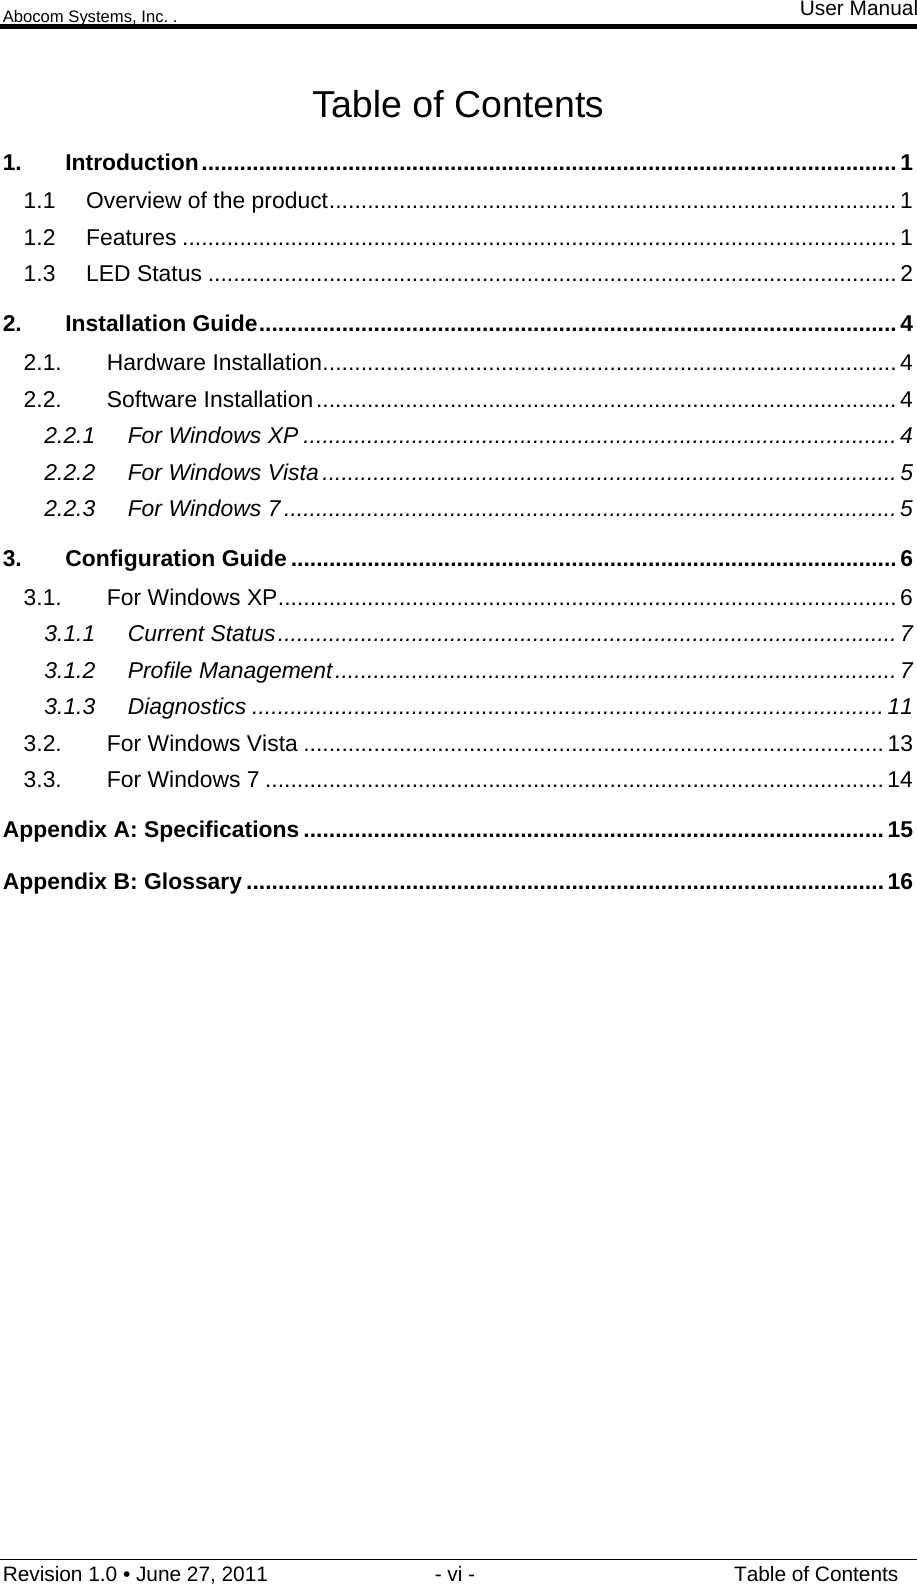 Abocom Systems, Inc. . User Manual Revision 1.0 • June 27, 2011                             - vi -                                             Table of Contents Table of Contents 1. Introduction ............................................................................................................. 1 1.1 Overview of the product ......................................................................................... 1 1.2 Features ................................................................................................................ 1 1.3 LED Status ............................................................................................................ 2 2. Installation Guide .................................................................................................... 4 2.1. Hardware Installation .......................................................................................... 4 2.2. Software Installation ........................................................................................... 4 2.2.1 For Windows XP ............................................................................................. 4 2.2.2 For Windows Vista .......................................................................................... 5 2.2.3 For Windows 7 ................................................................................................ 5 3. Configuration Guide ............................................................................................... 6 3.1. For Windows XP ................................................................................................. 6 3.1.1 Current Status ................................................................................................. 7 3.1.2 Profile Management ........................................................................................ 7 3.1.3 Diagnostics ................................................................................................... 11 3.2. For Windows Vista ........................................................................................... 13 3.3. For Windows 7 ................................................................................................. 14 Appendix A: Specifications ........................................................................................... 15 Appendix B: Glossary .................................................................................................... 16  